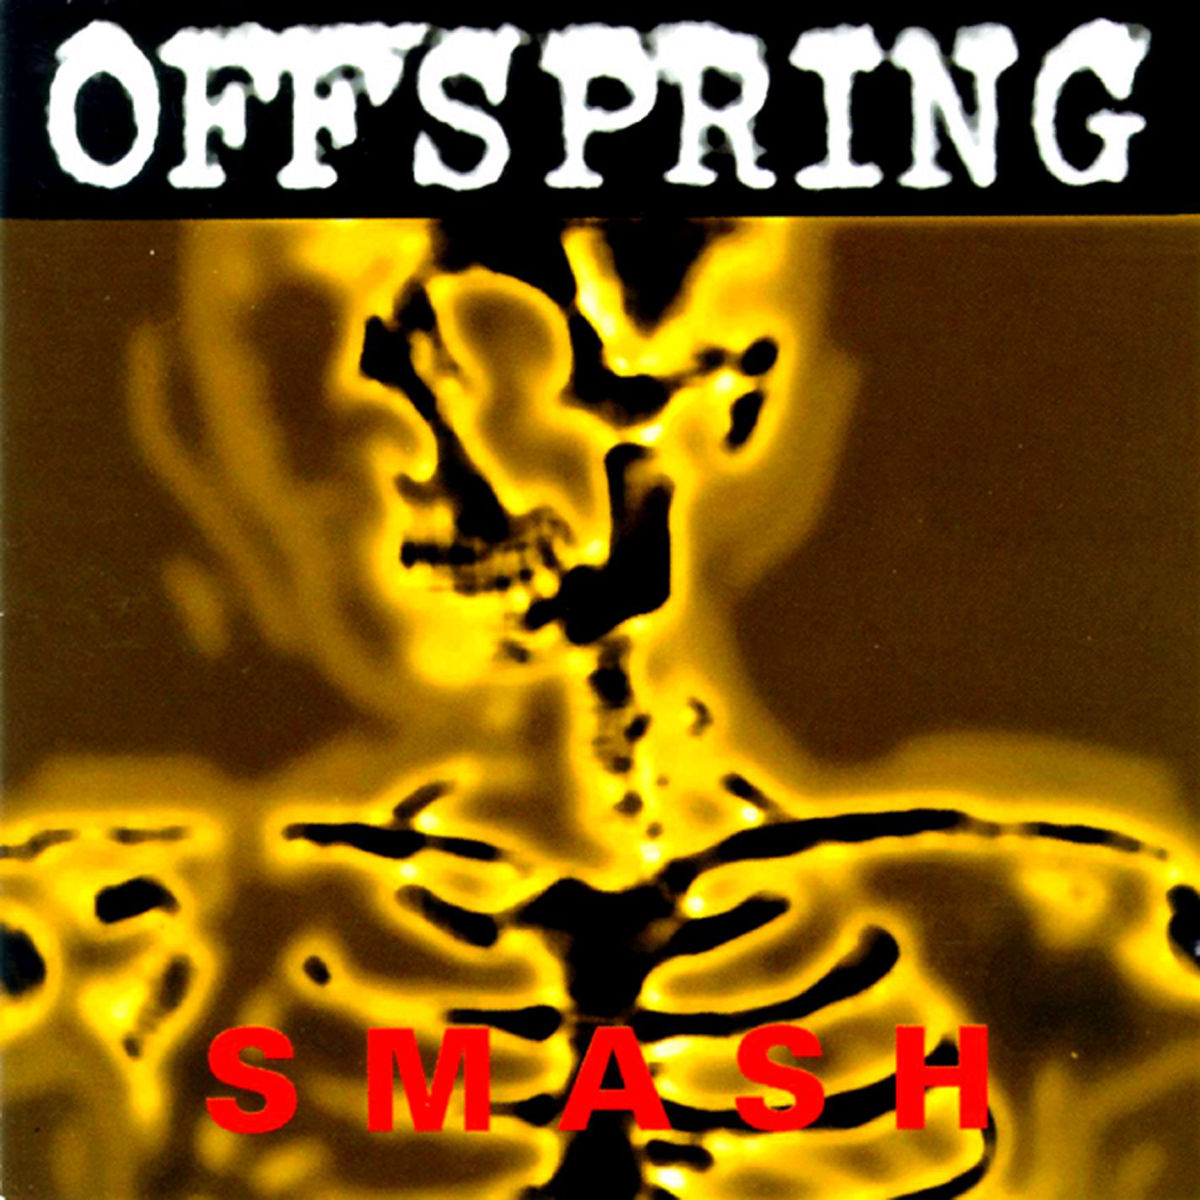 Art for Come Out and Play by The Offspring